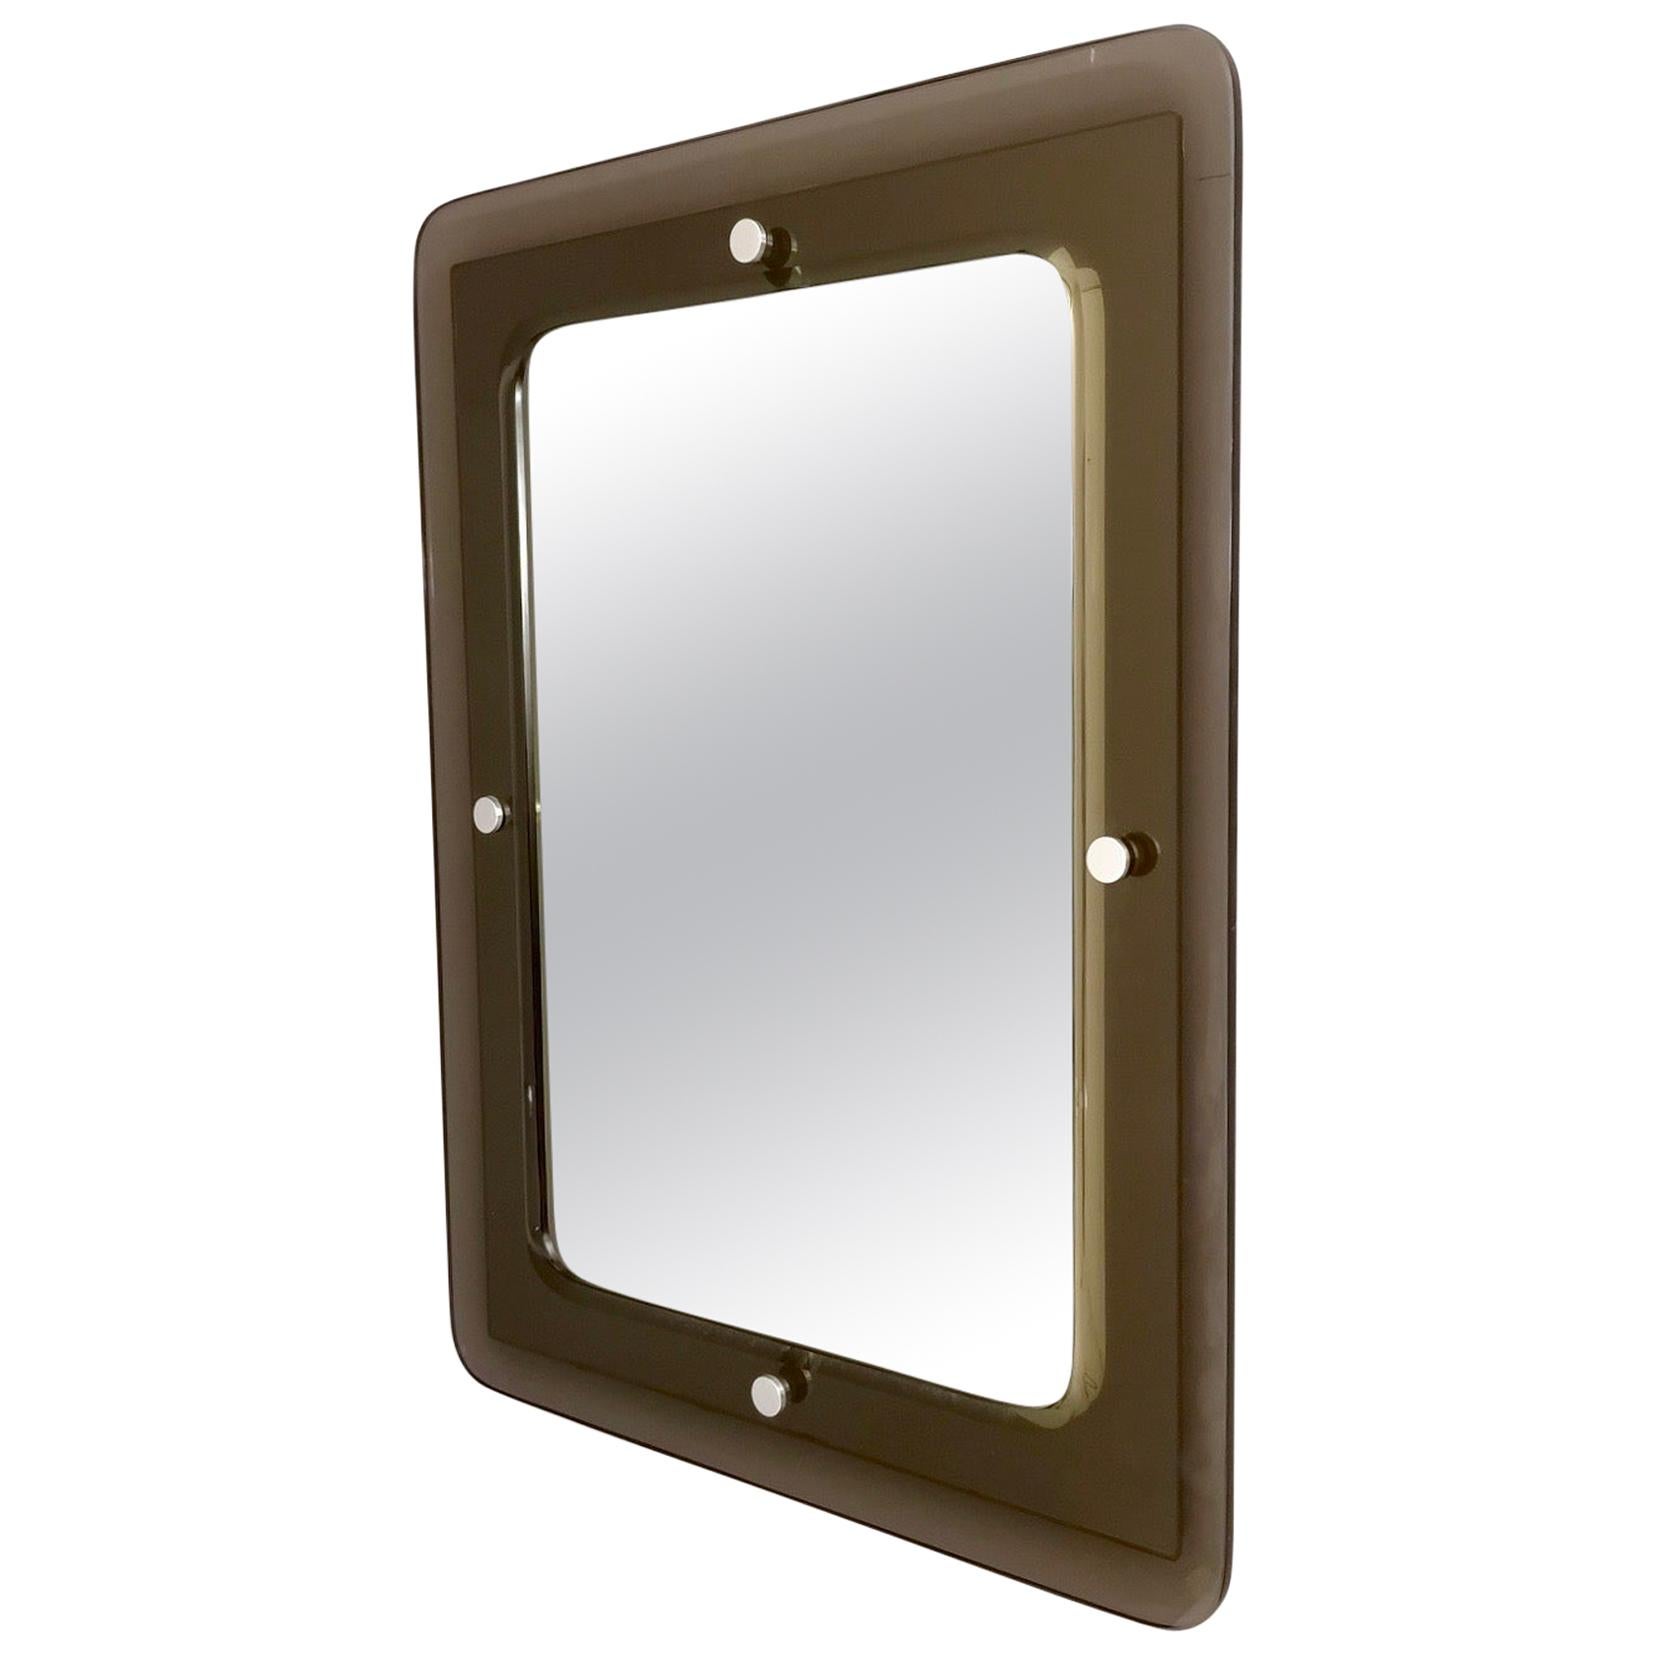 Made in Italy, 1960s.
This mirror features a beveled smoked glass frame with nickel-plated brass details. 
It can be positioned both horizontally and vertically.
It might show slight traces of use since it's vintage, but it can be considered as